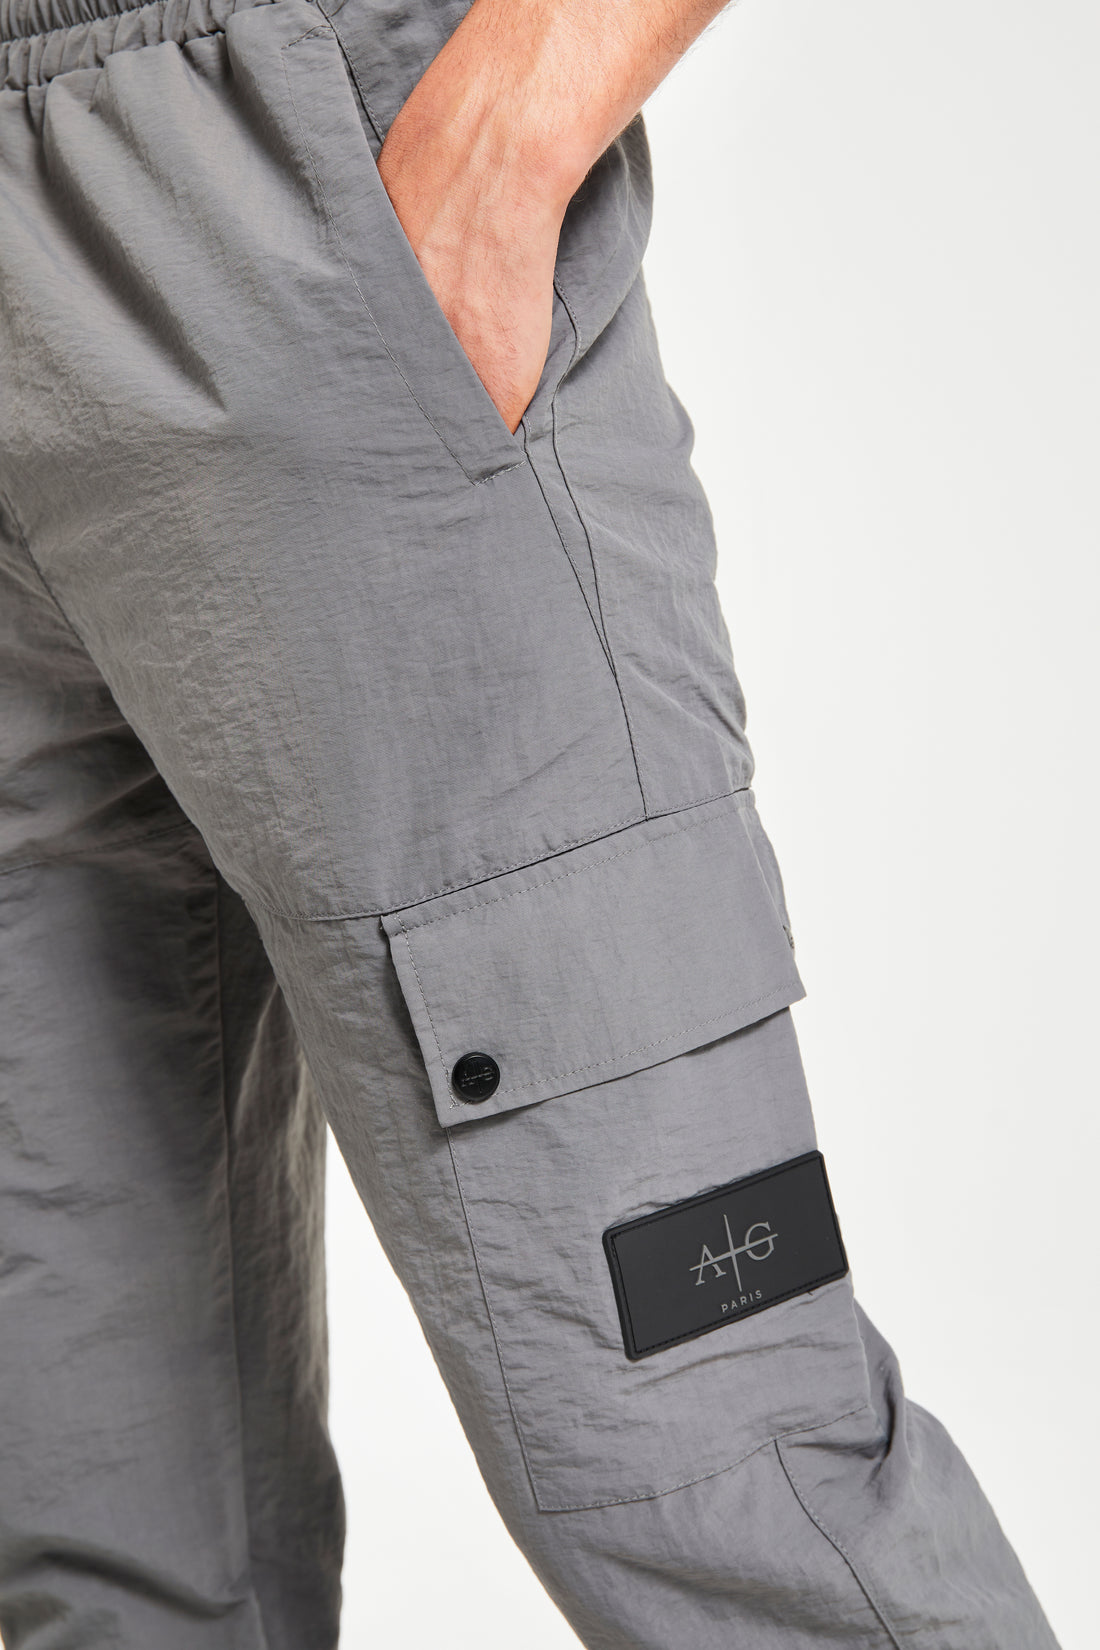 Men's cargo trousers close up in charcoal grey